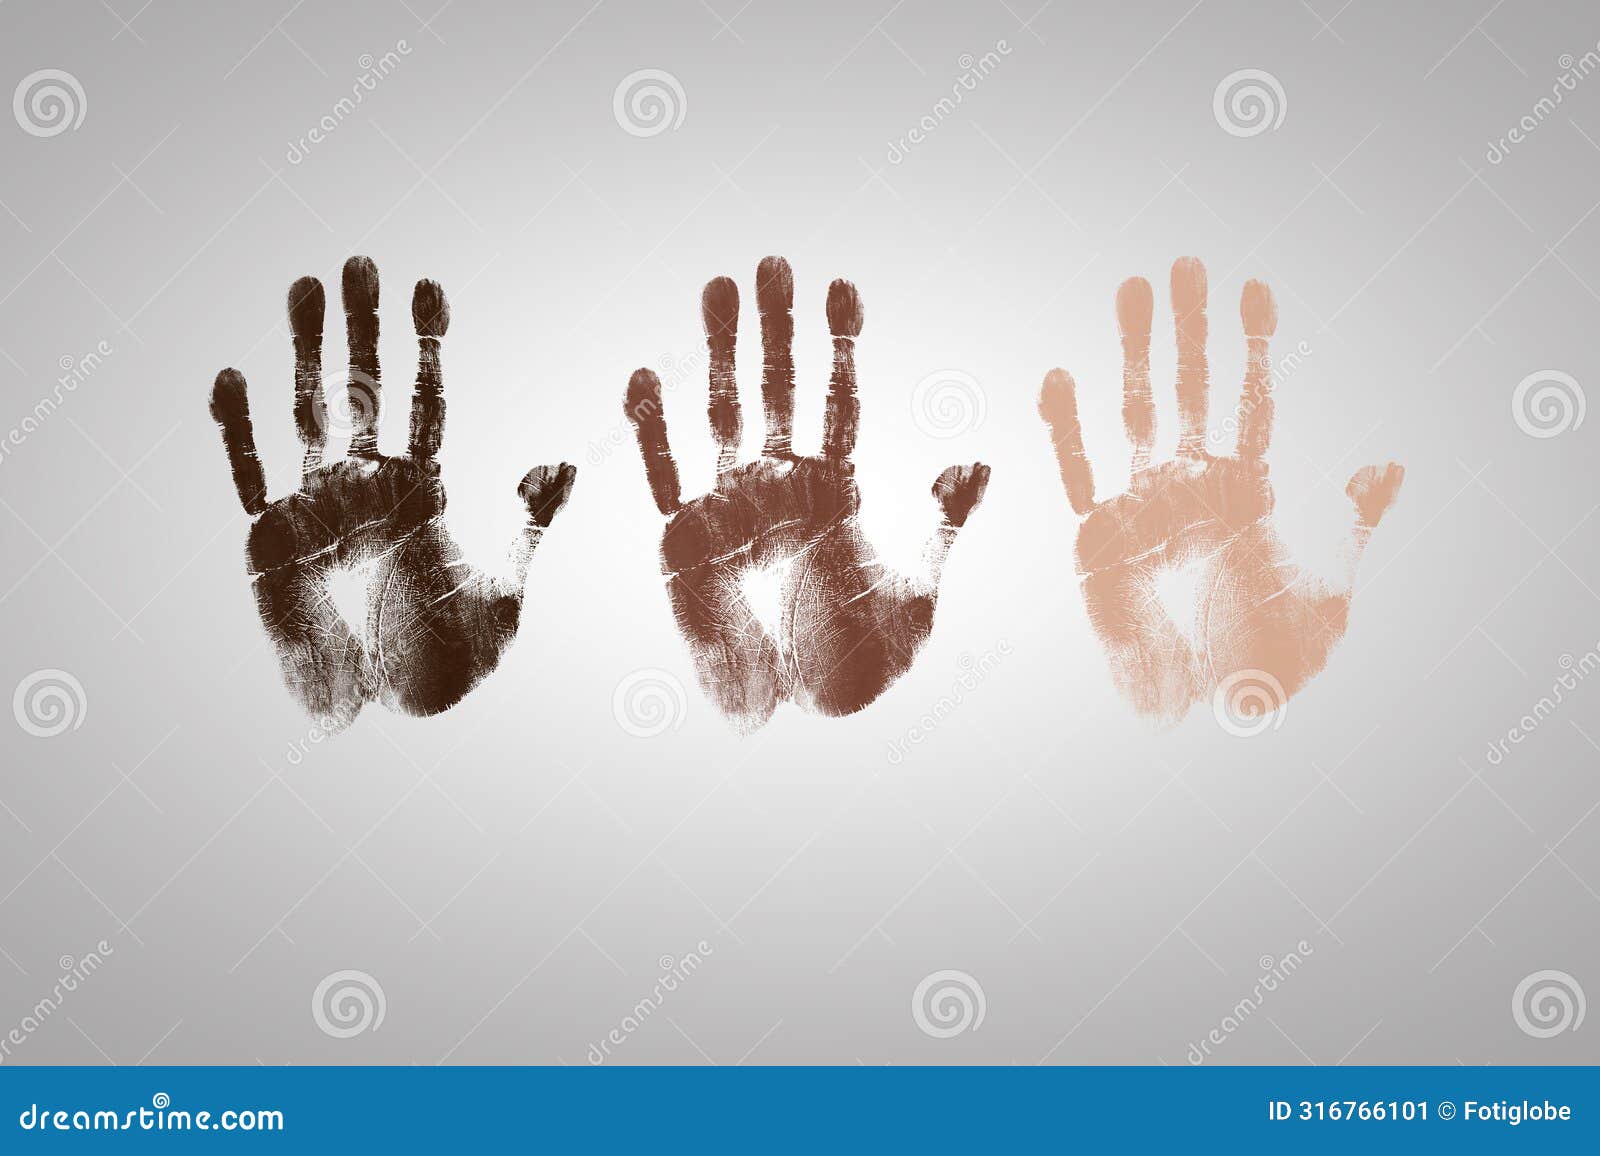 handprint with different colors representing skin colors and ethnicity showing diversity and multiculturalism